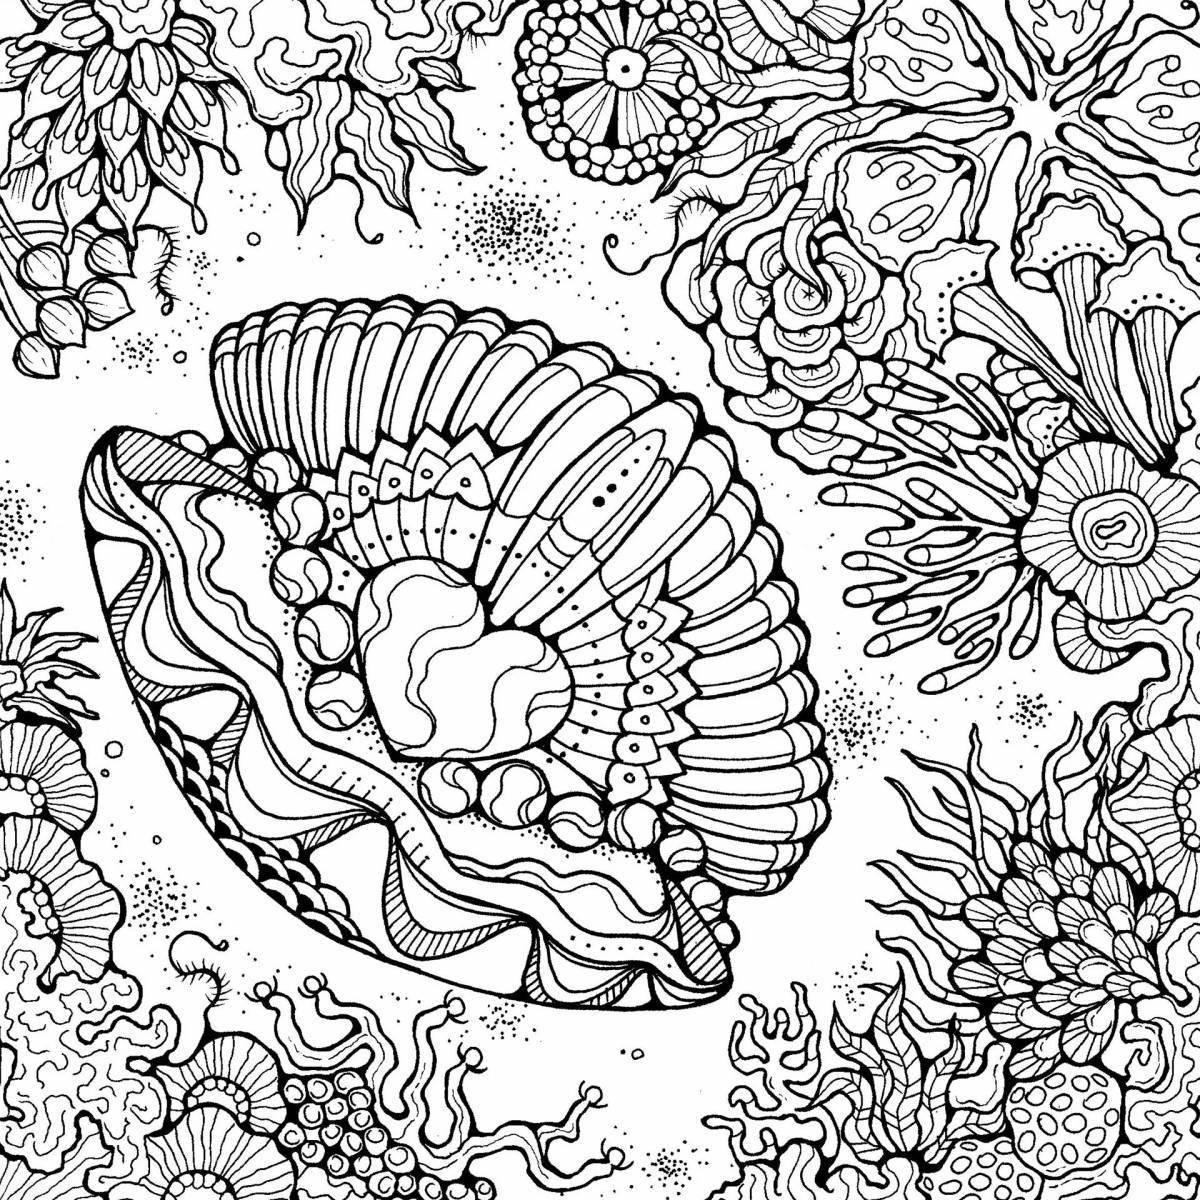 Refreshing letter-eater antistress coloring page